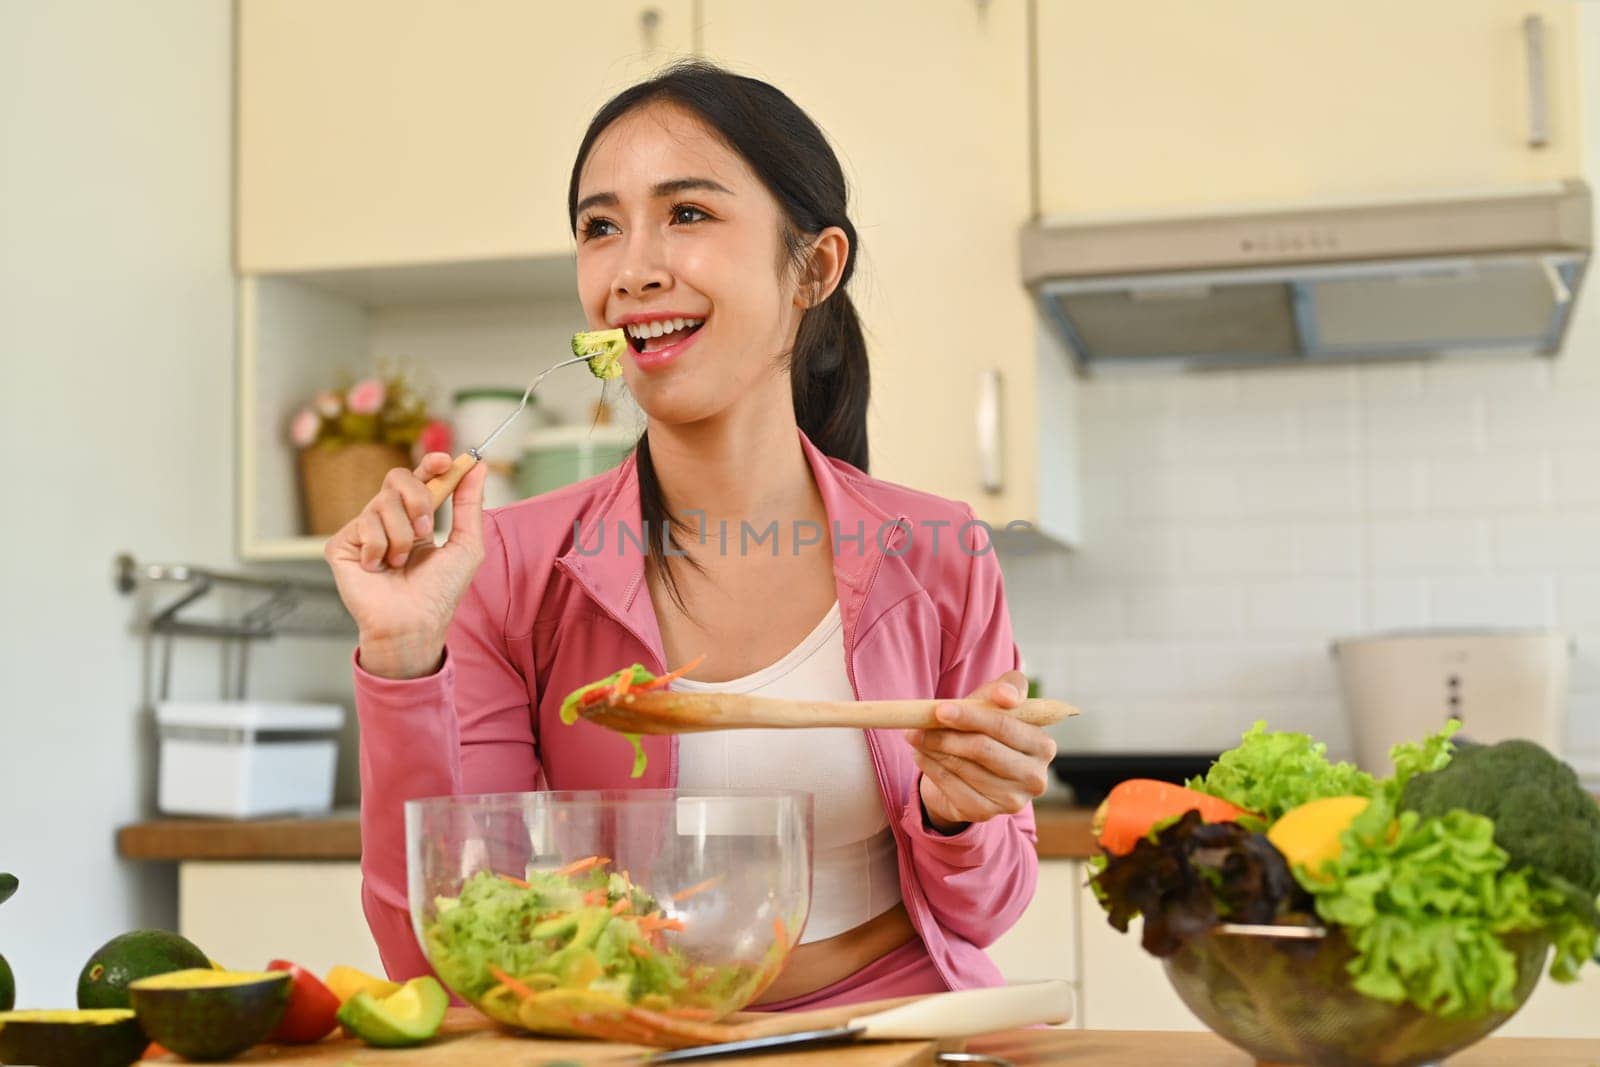 Portrait sporty woman eating vegetable salad in the kitchen. Dieting, health lifestyle and nutrition concept by prathanchorruangsak